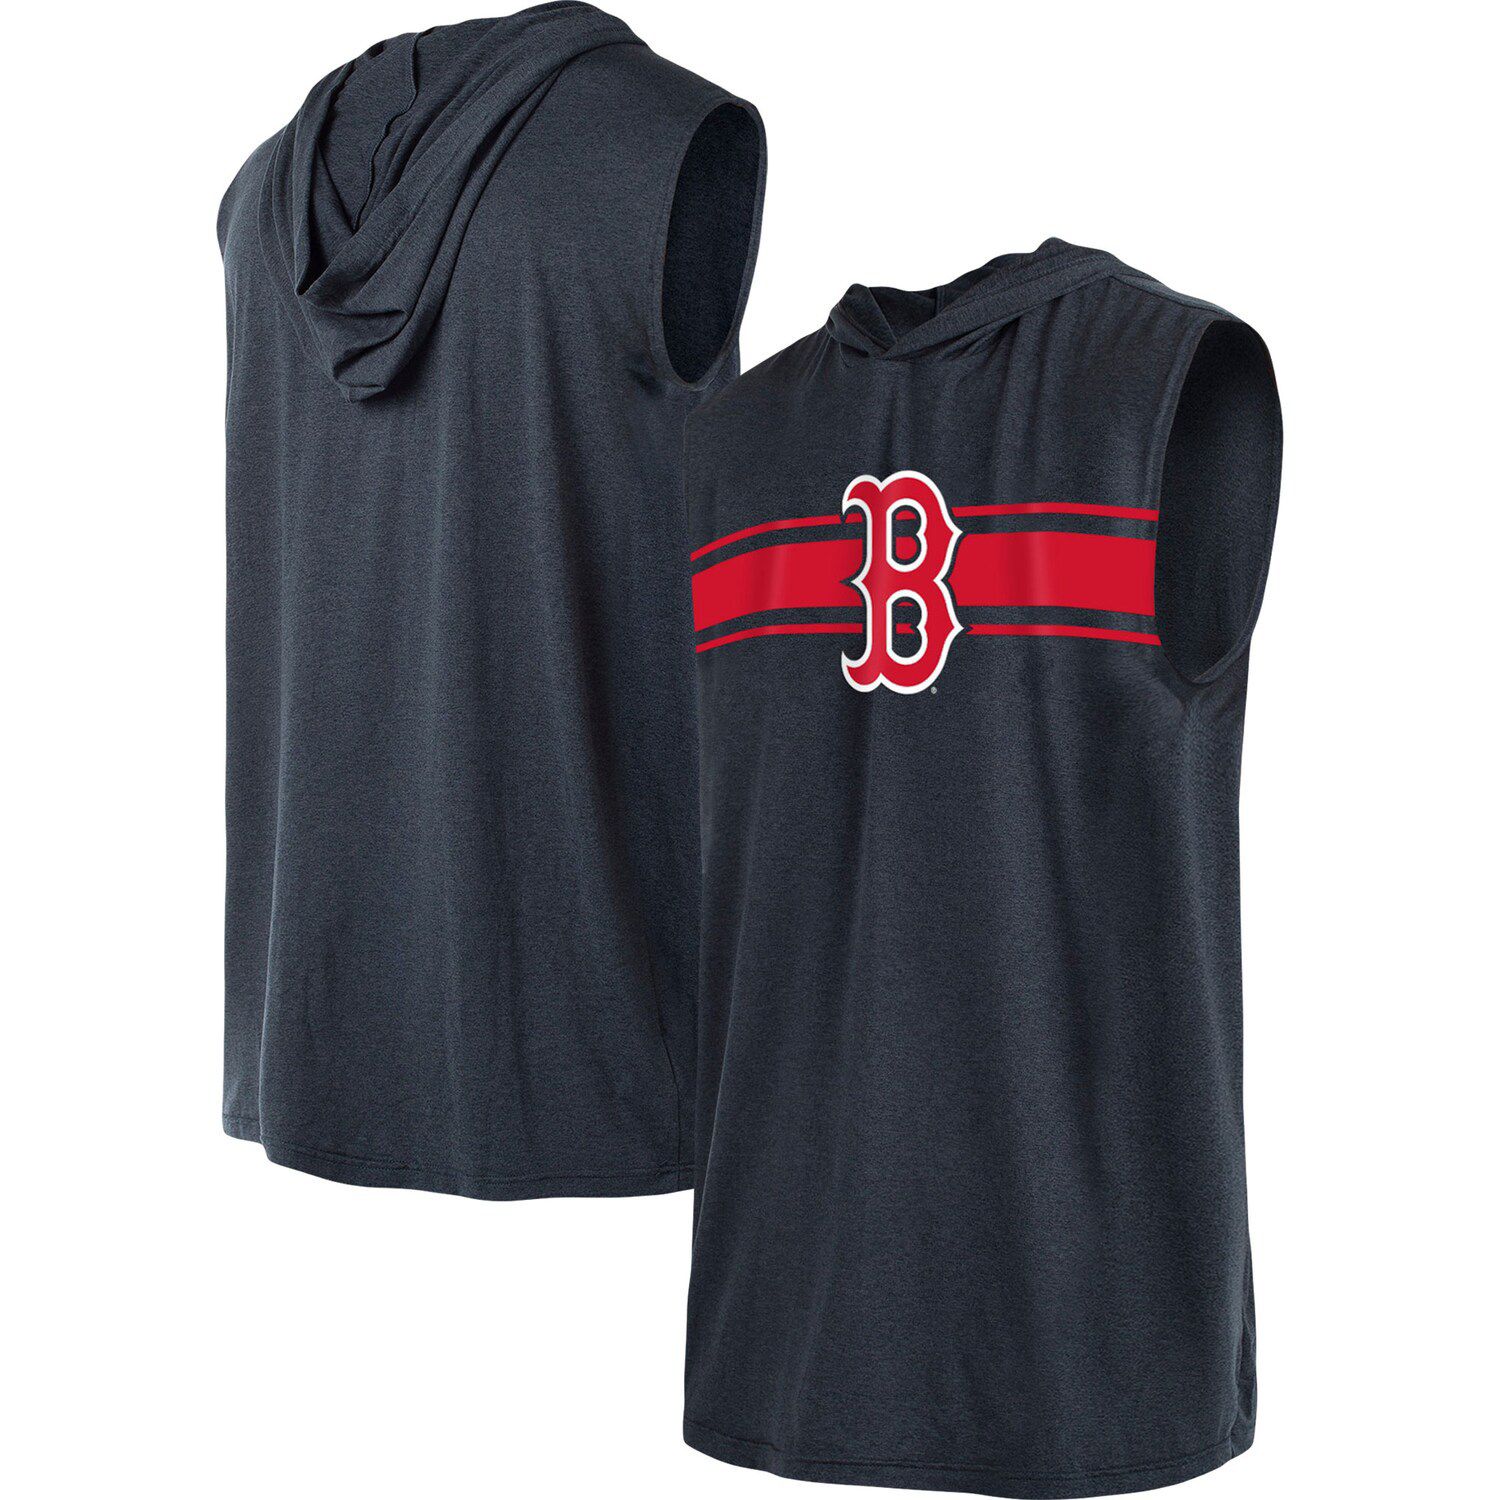 Men's Nike Red St. Louis Cardinals Athletic Sleeveless Hooded T-Shirt